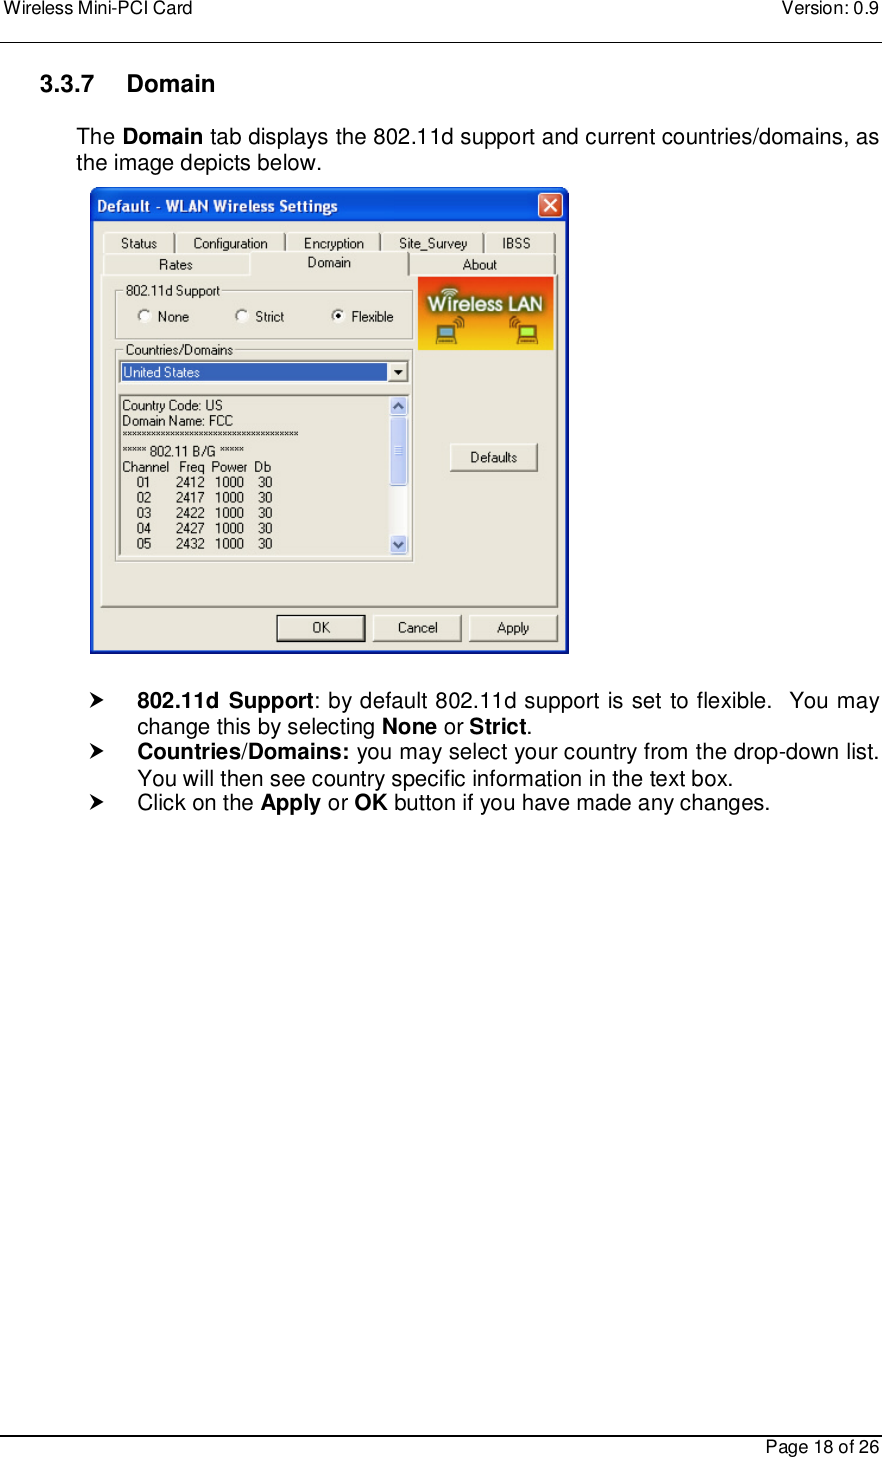 Wireless Mini-PCI Card    Version: 0.9    Page 18 of 26 3.3.7    Domain   The Domain tab displays the 802.11d support and current countries/domains, as the image depicts below.                       802.11d Support: by default 802.11d support is set to flexible.  You may change this by selecting None or Strict.    Countries/Domains: you may select your country from the drop-down list. You will then see country specific information in the text box.   Click on the Apply or OK button if you have made any changes.    